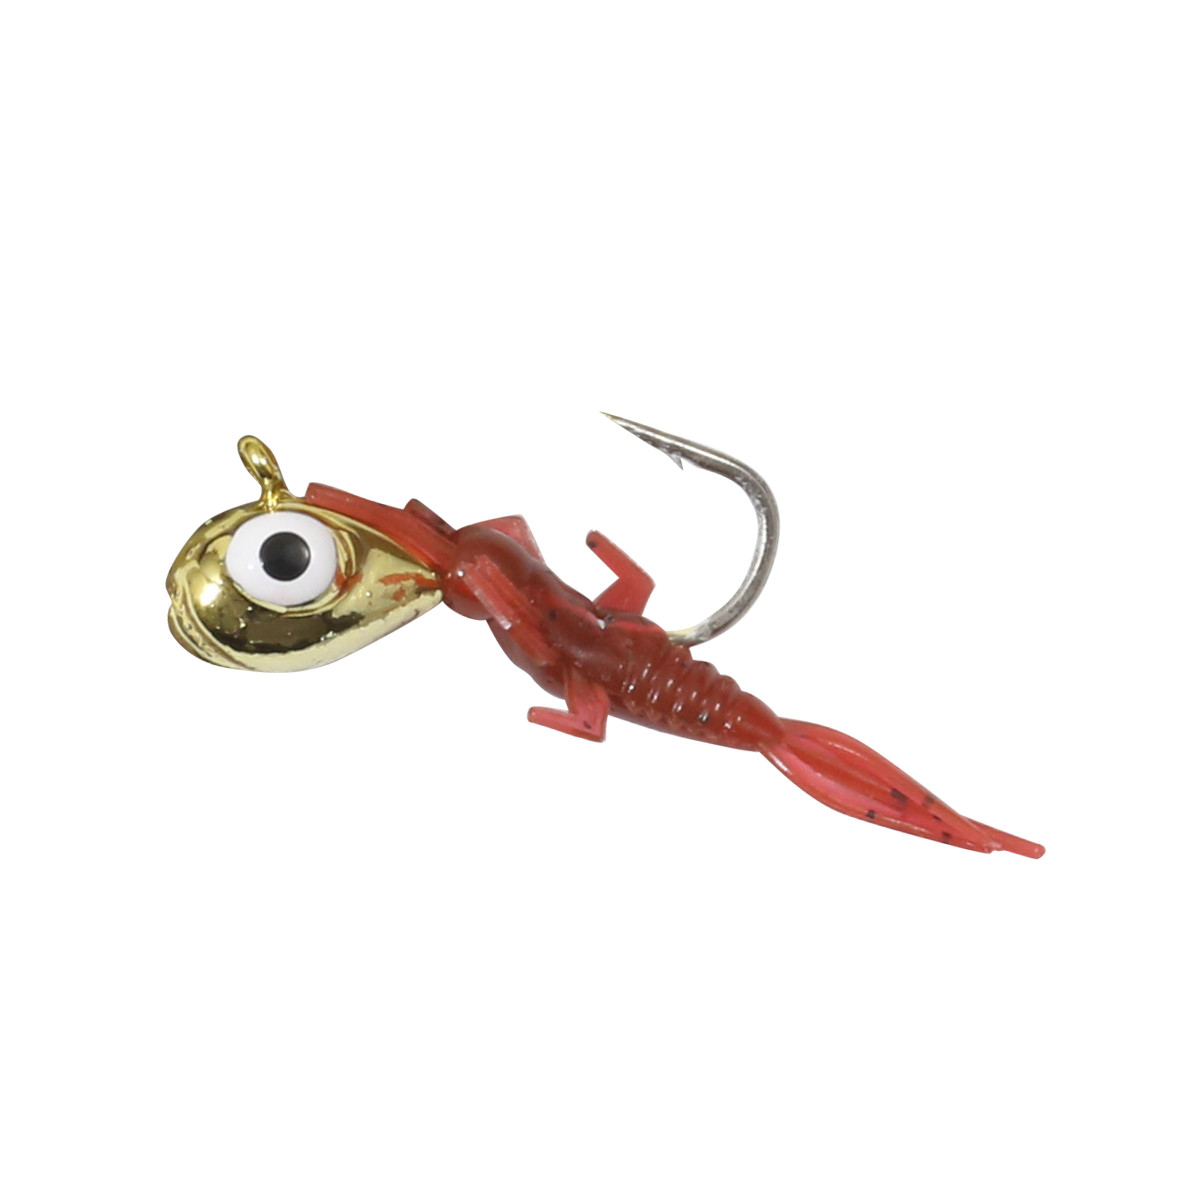 https://op1.0ps.us/original/opplanet-northland-fishing-tackle-rigged-tungsten-mayfly-jig-gold-1-28-oz-tmr12-12-main